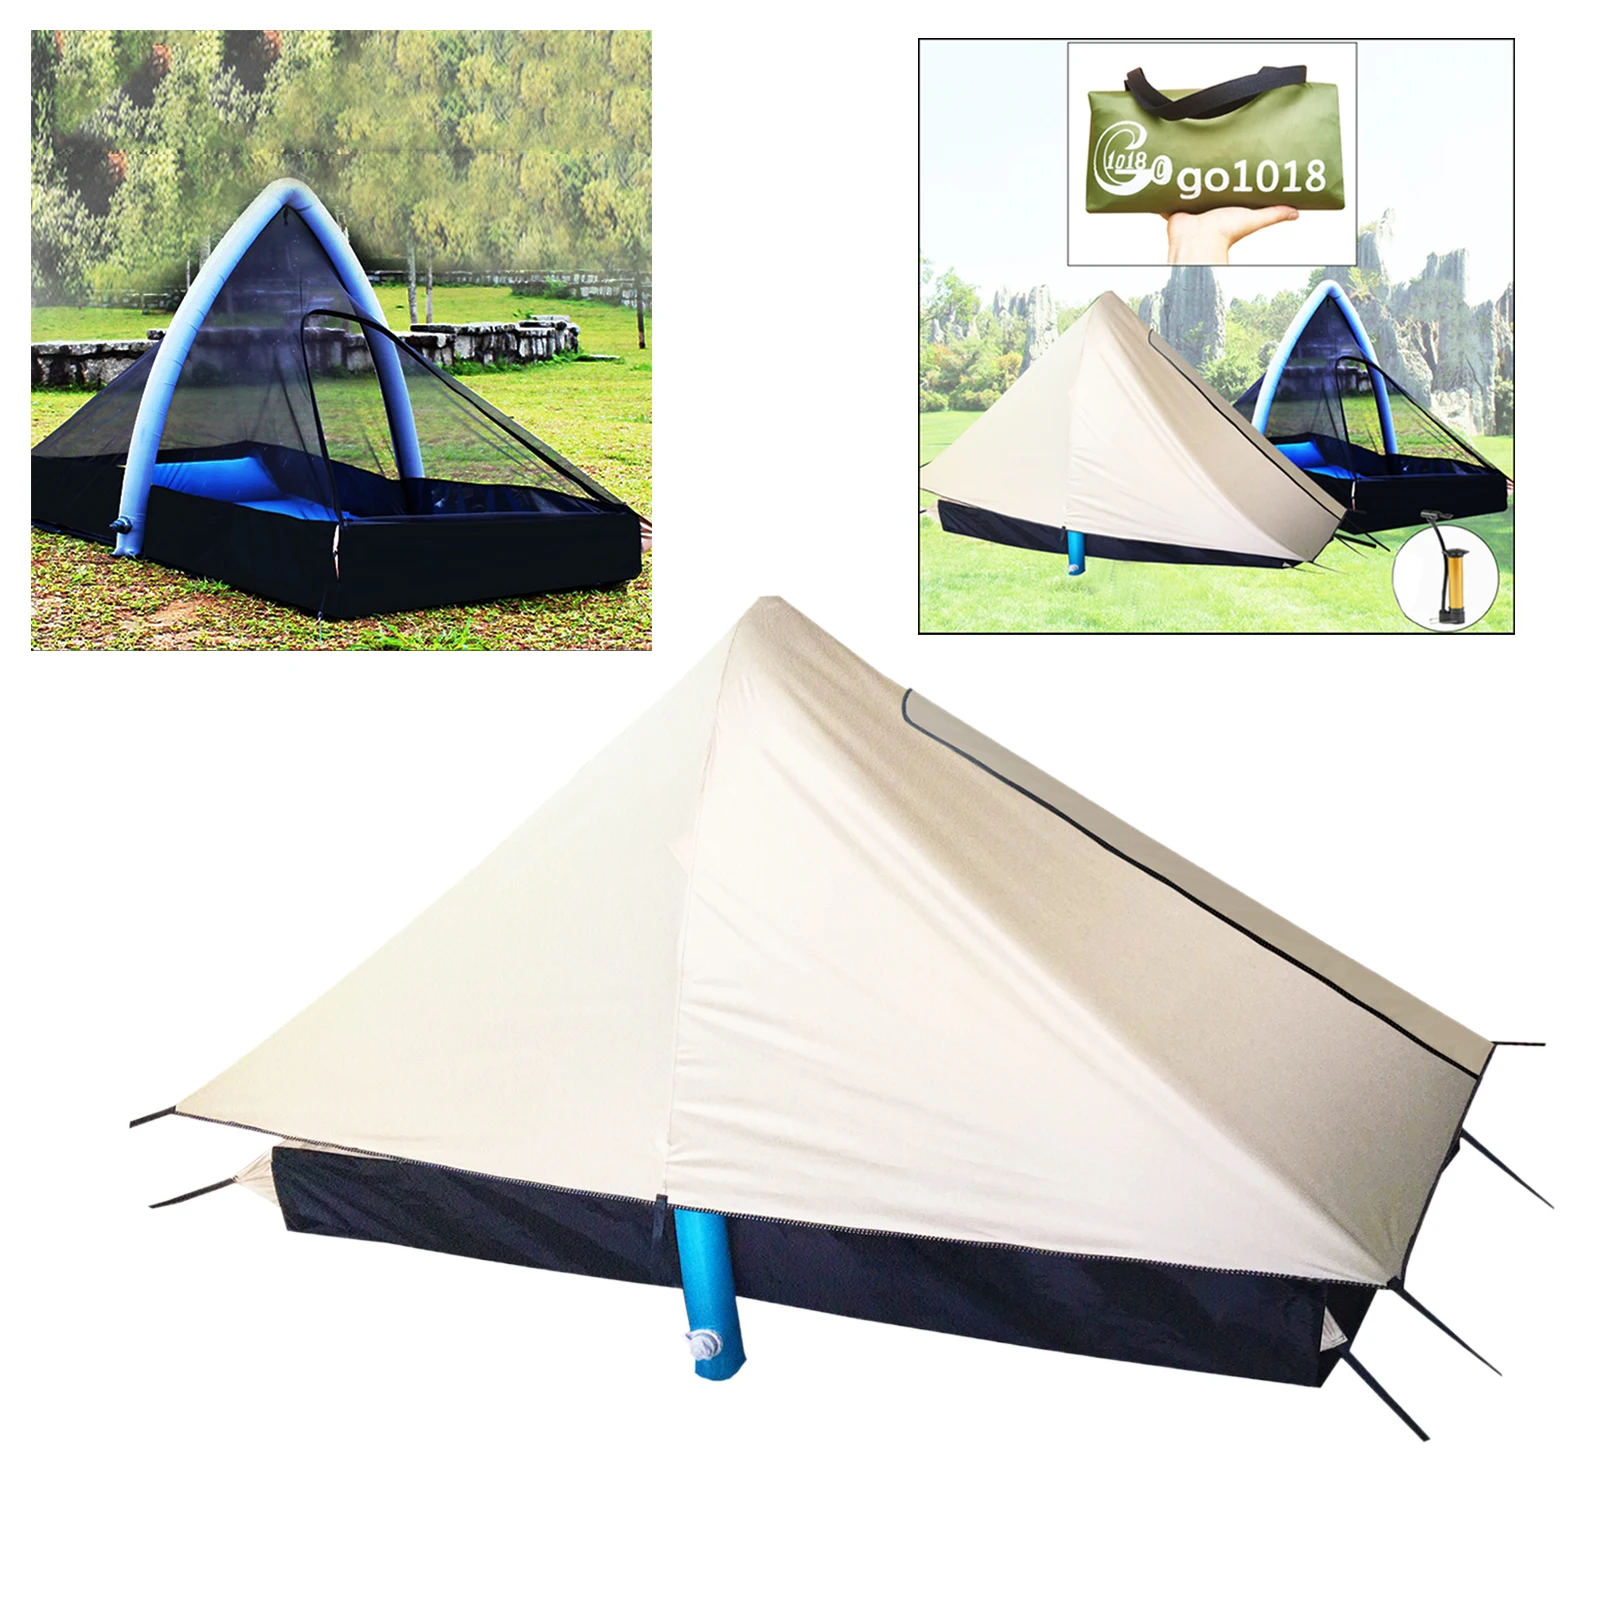 Waterproof Inflatable Single Tents Weather Pod Sun Shelter Portable 1-2 Person Tent for Adults Kids Family Camping Hunting